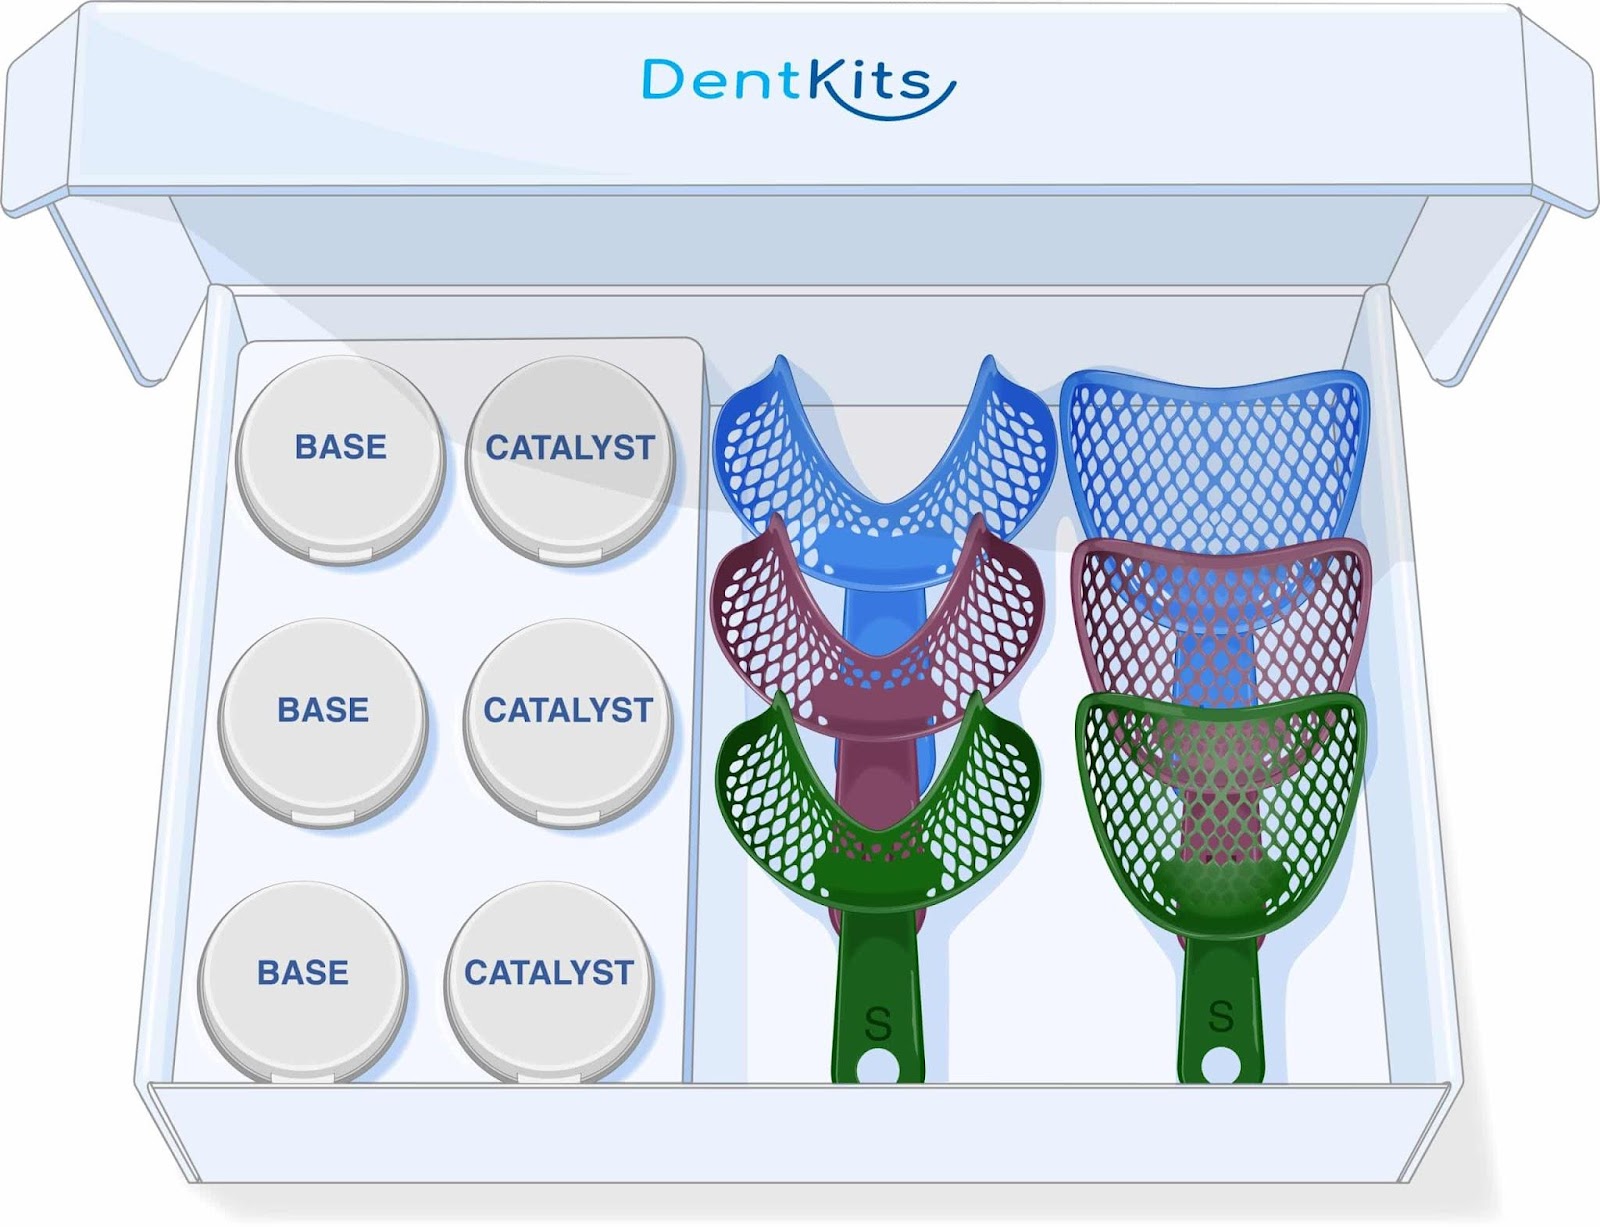 DentKits is an online dentures store that helps customers get custom, affordable dentures online without the need to visit a dental clinic.